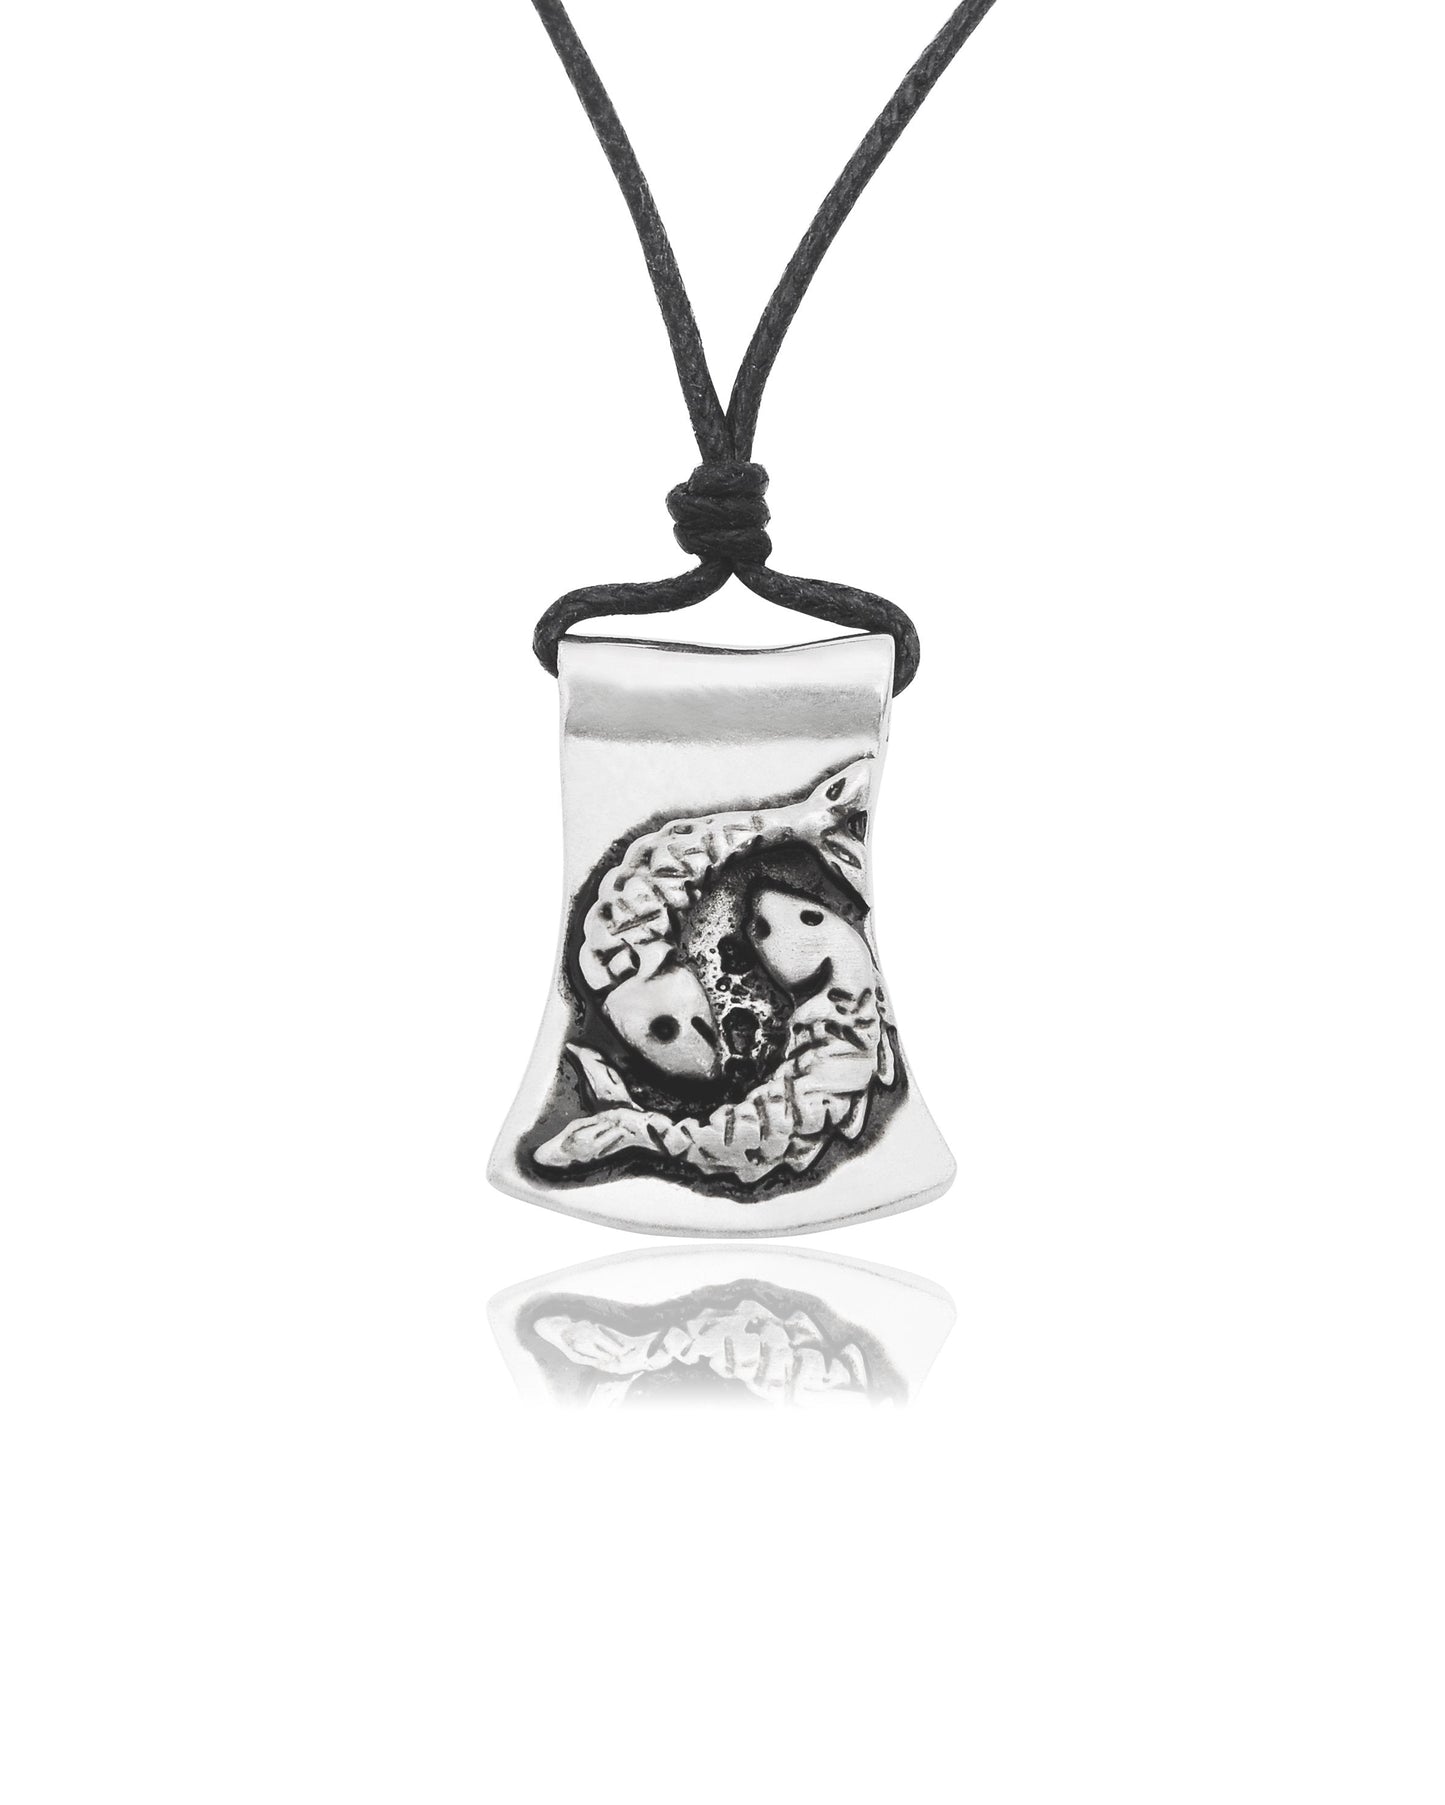 Astrology Silver Pewter Charm Necklace Pendant Jewelry